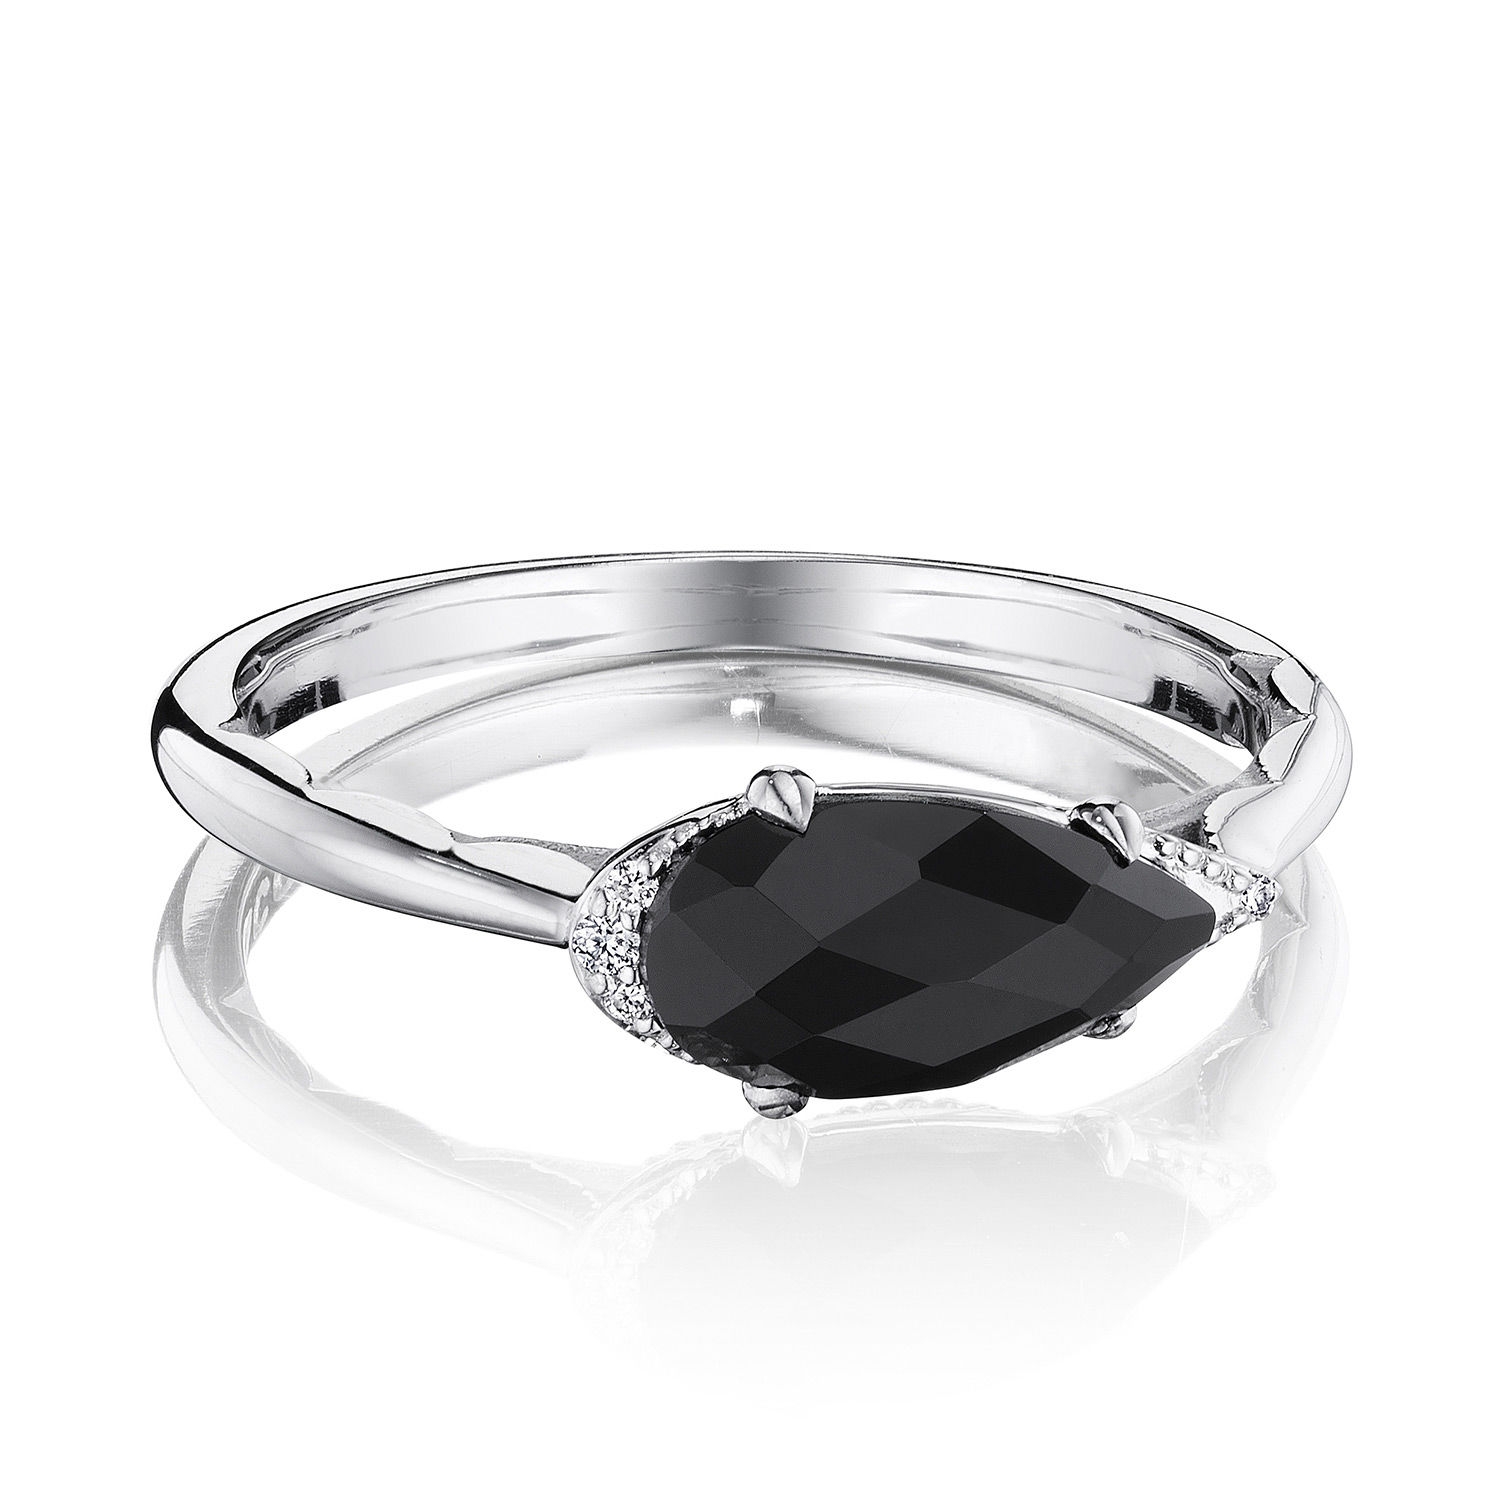 Tacori SR23319 Solitaire Pear-Shaped Ring with Black Onyx